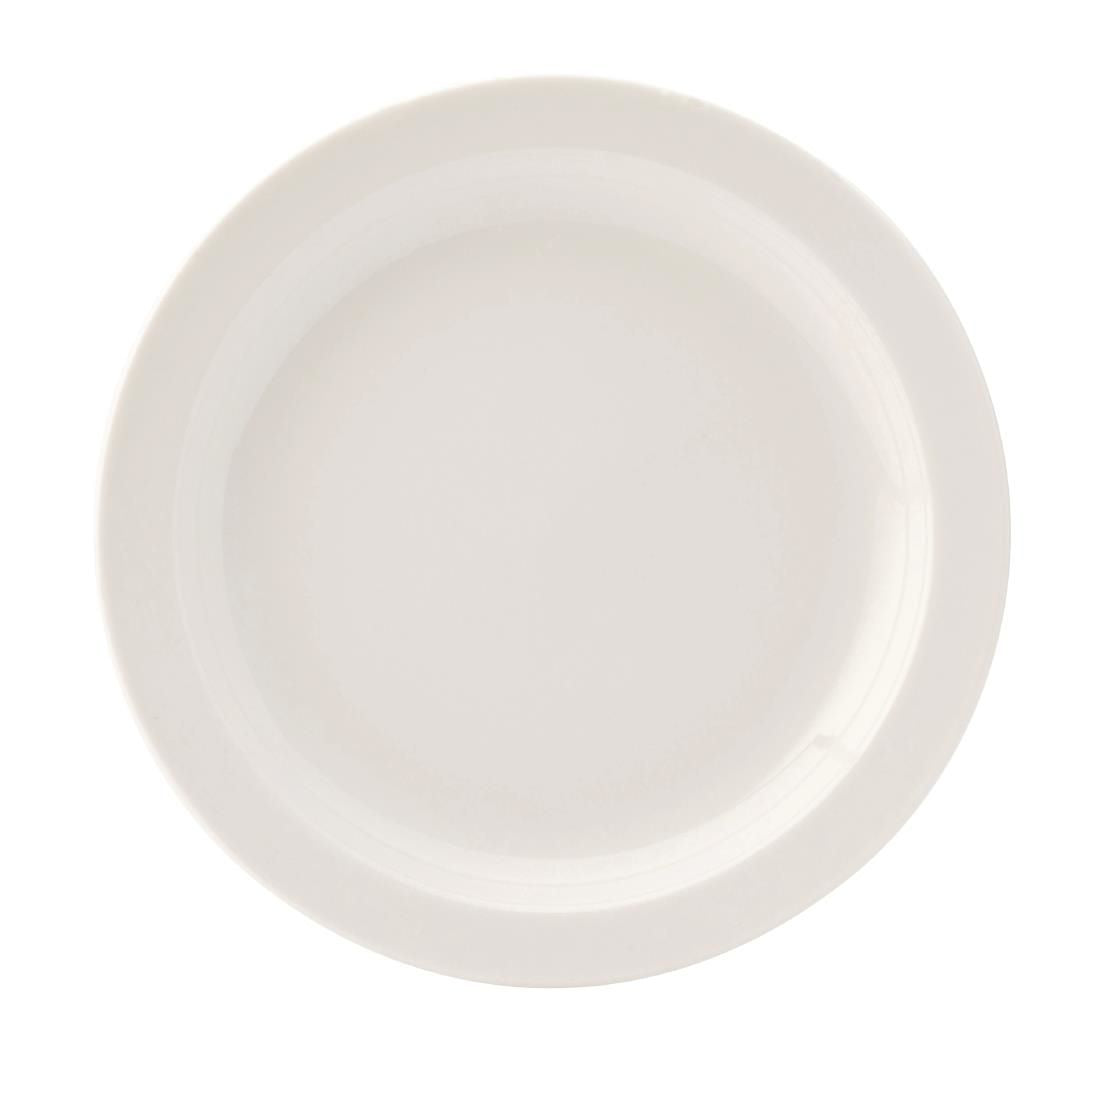 DB610 Utopia Pure White Narrow Rim Plates 167mm (Pack of 36) JD Catering Equipment Solutions Ltd